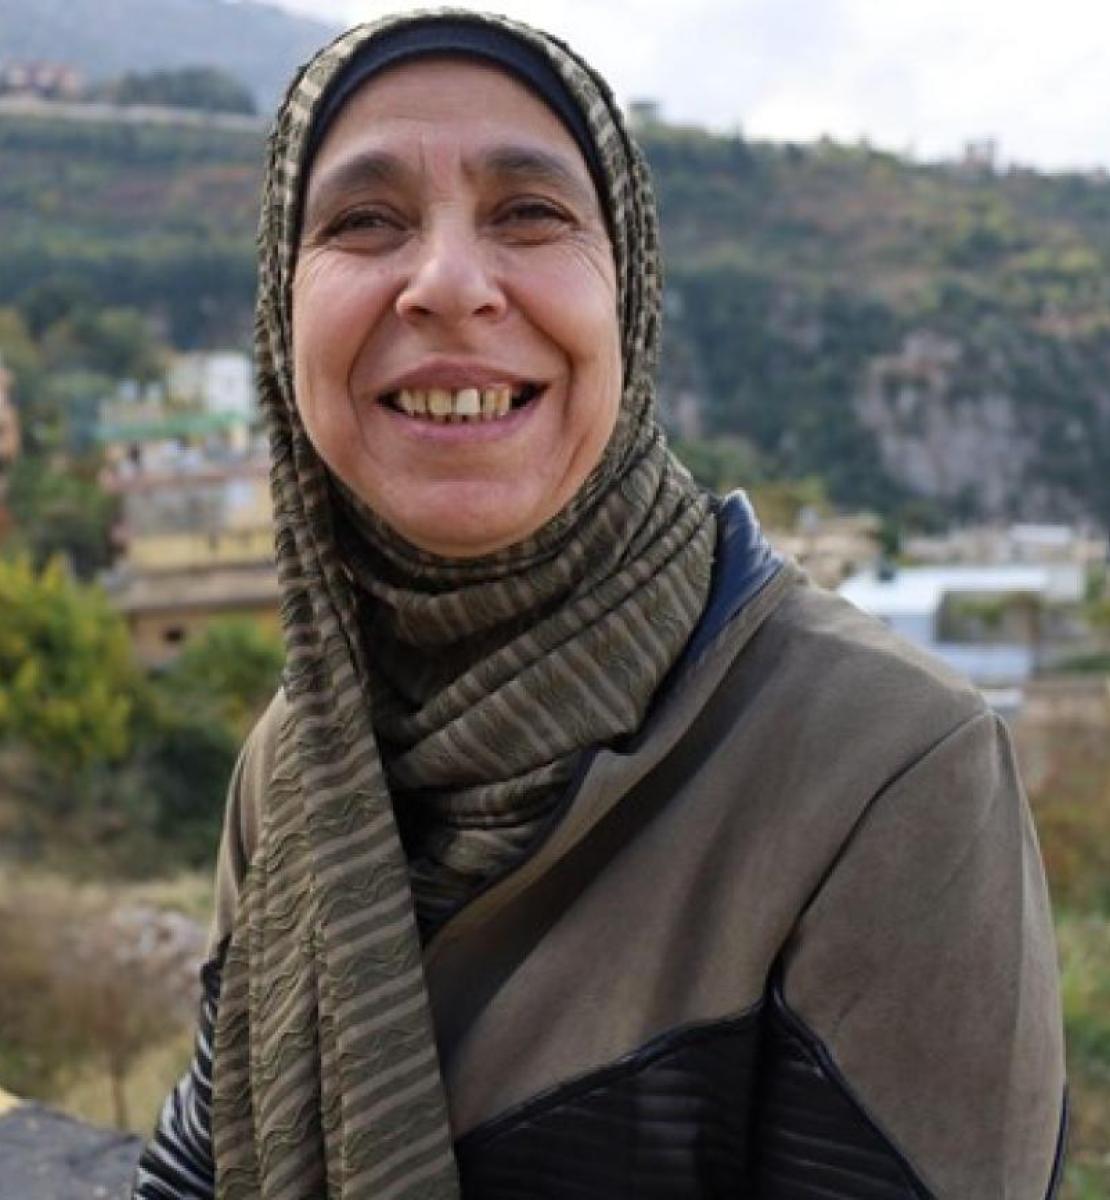 Woman in a headscarf smiling at the camera